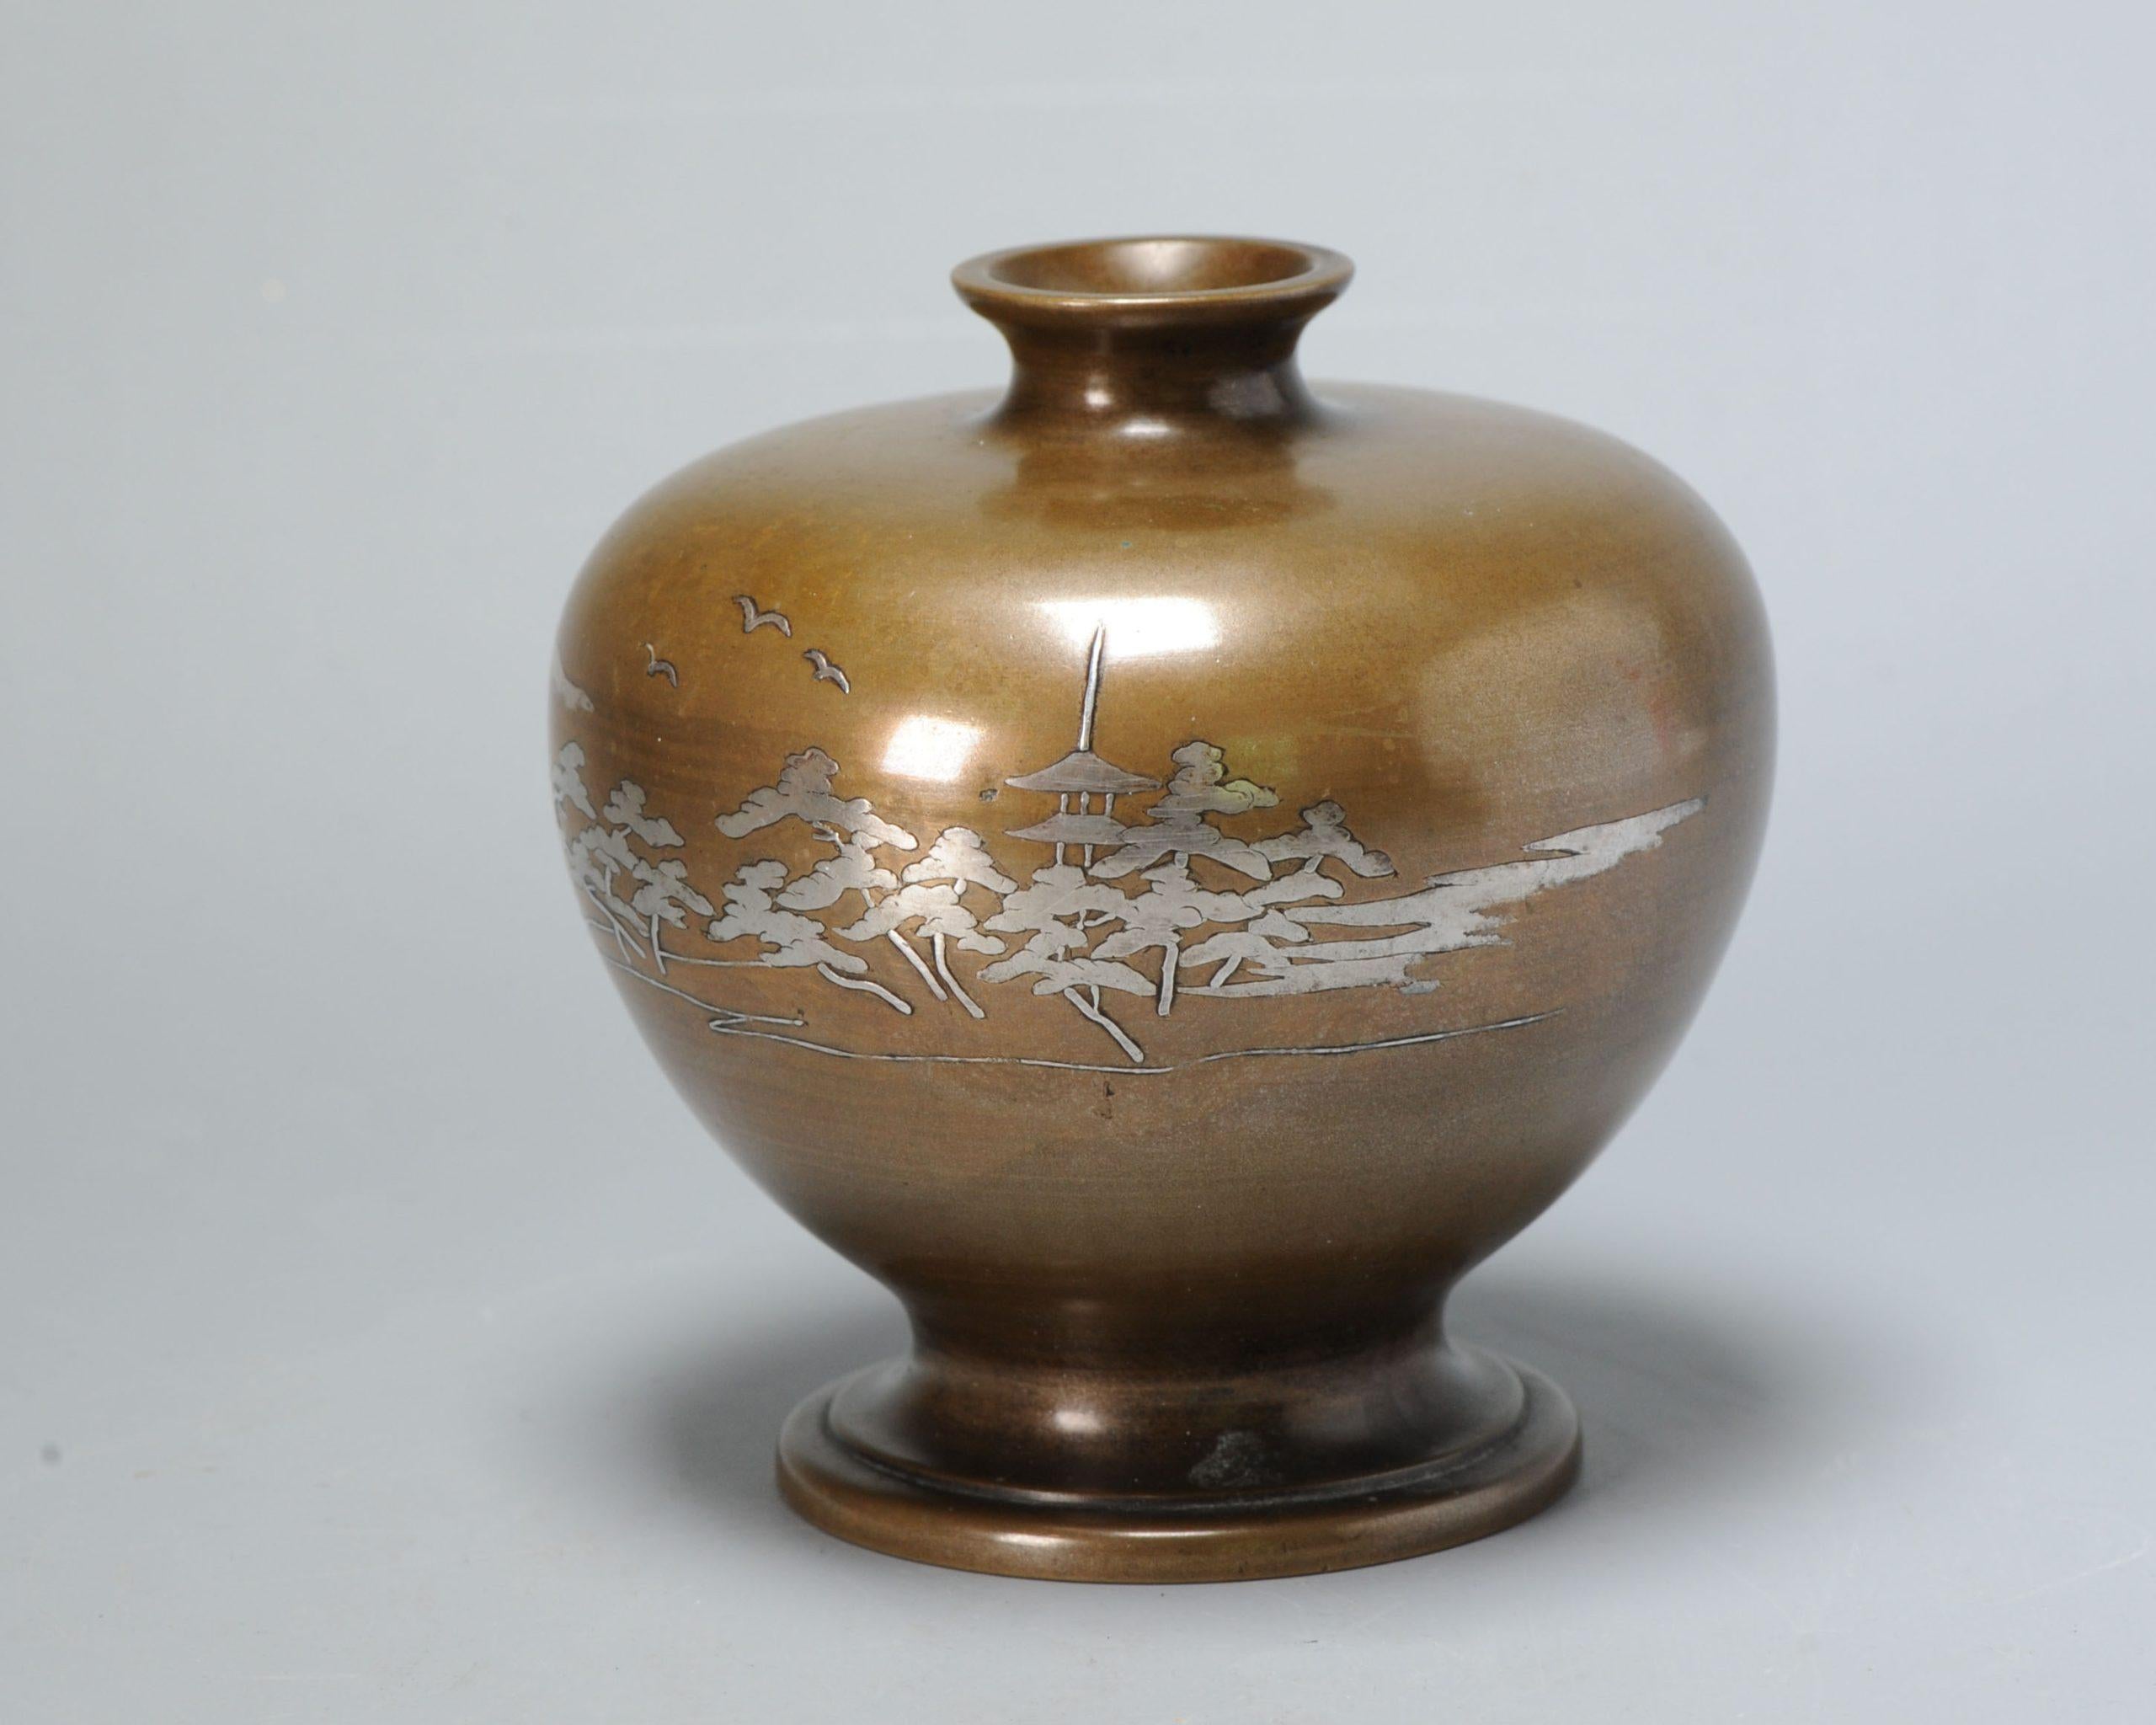 Japan, silver inlaid bronze vase, Meiji period (1868-1912), the bulbous vase inlaid with a temple in a landscape,

28-6-22-1-12

Condition
no real damages found, just a small process flaw in base and some ware. Size 130x120mm Height x